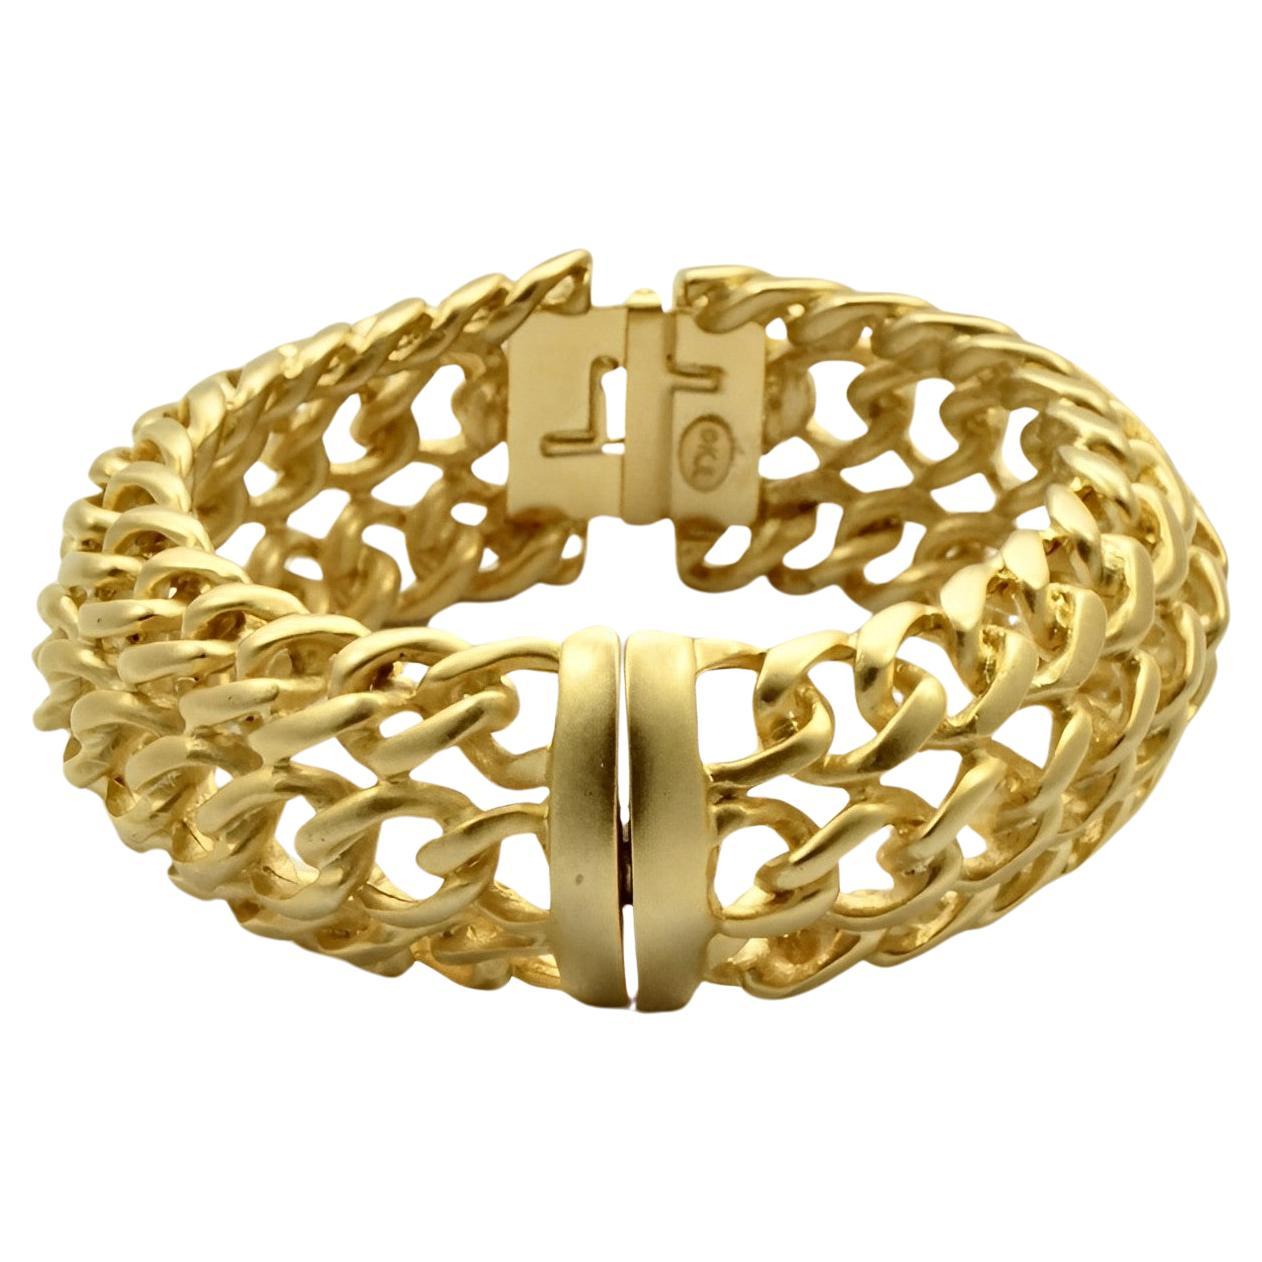 Kenneth Jay Lane matt gold plated triple chain bangle bracelet, with a magnetic clasp. Inside diameter 5.7 cm / 2.24 inches, outside diameter 7.6 cm / 3 inches, the width is 2.3 cm / .9 inch. The bracelet is in very good condition.

This is a